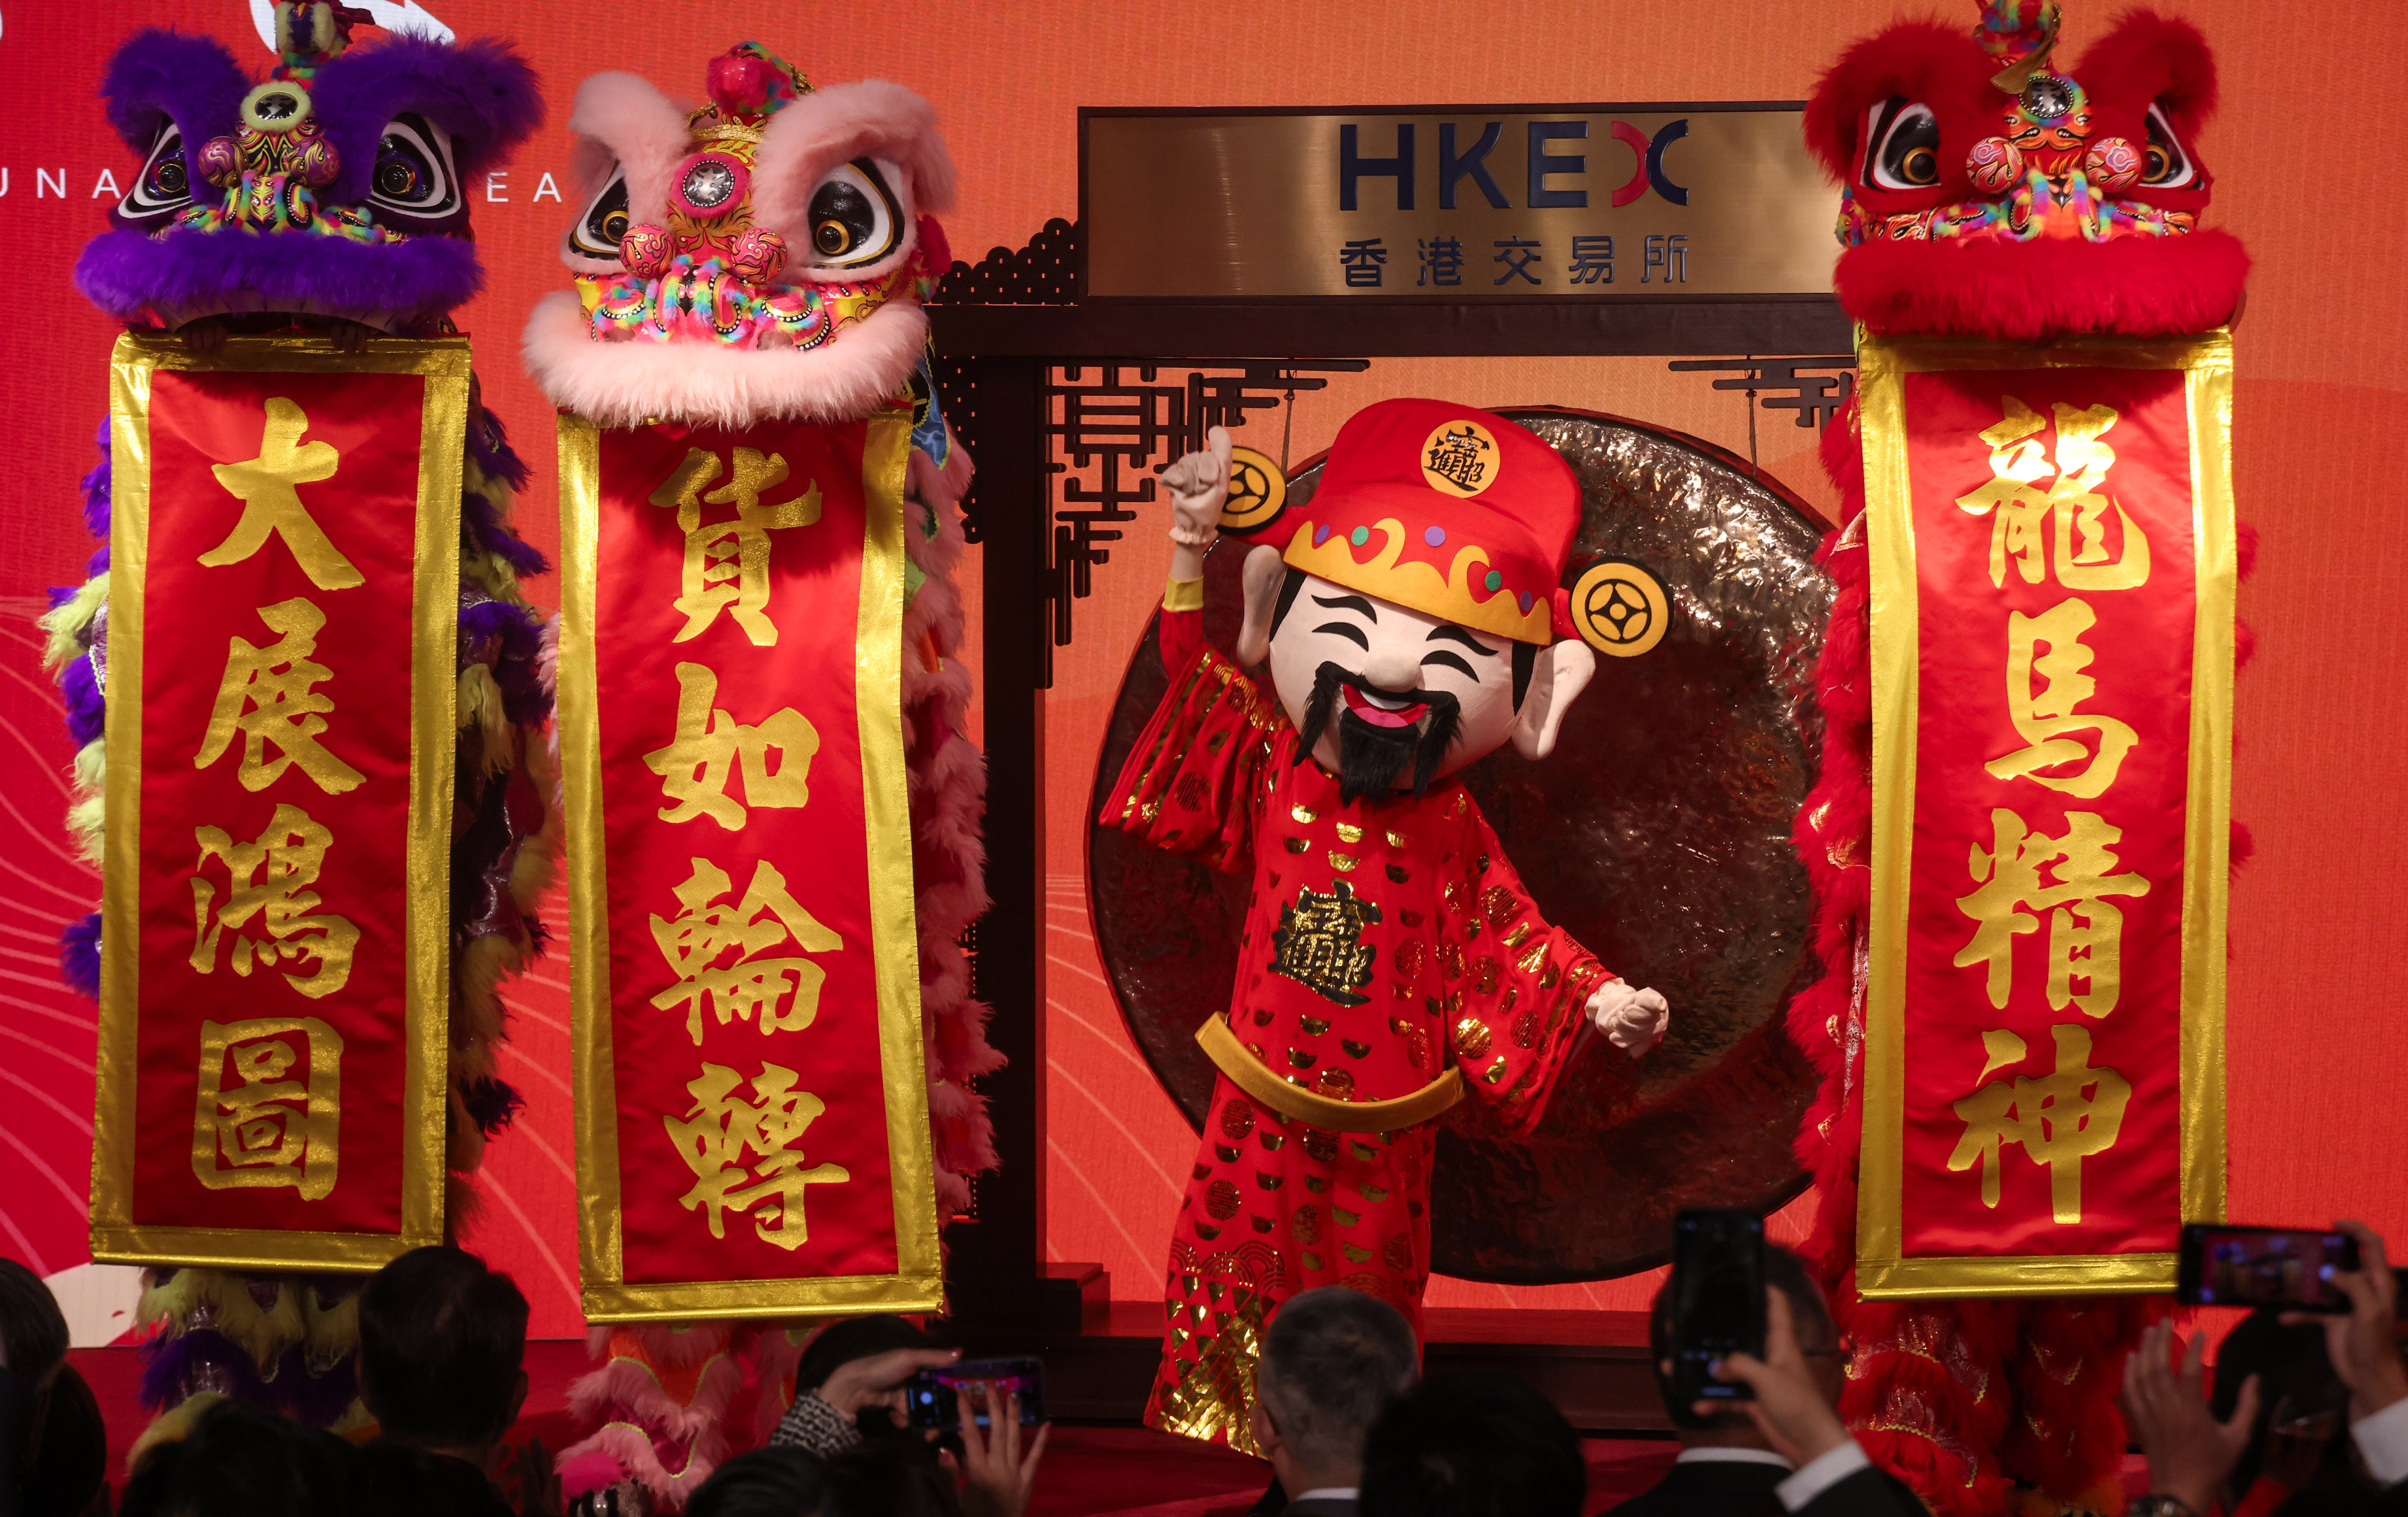 Hong Kong’s financial leaders greeted the Year of the Dragon with fanfare, optimistic that the auspicious zodiac sign will breathe some fire – or at least some life – into the city’s beaten down stock market. Photo: Jonathan Wong